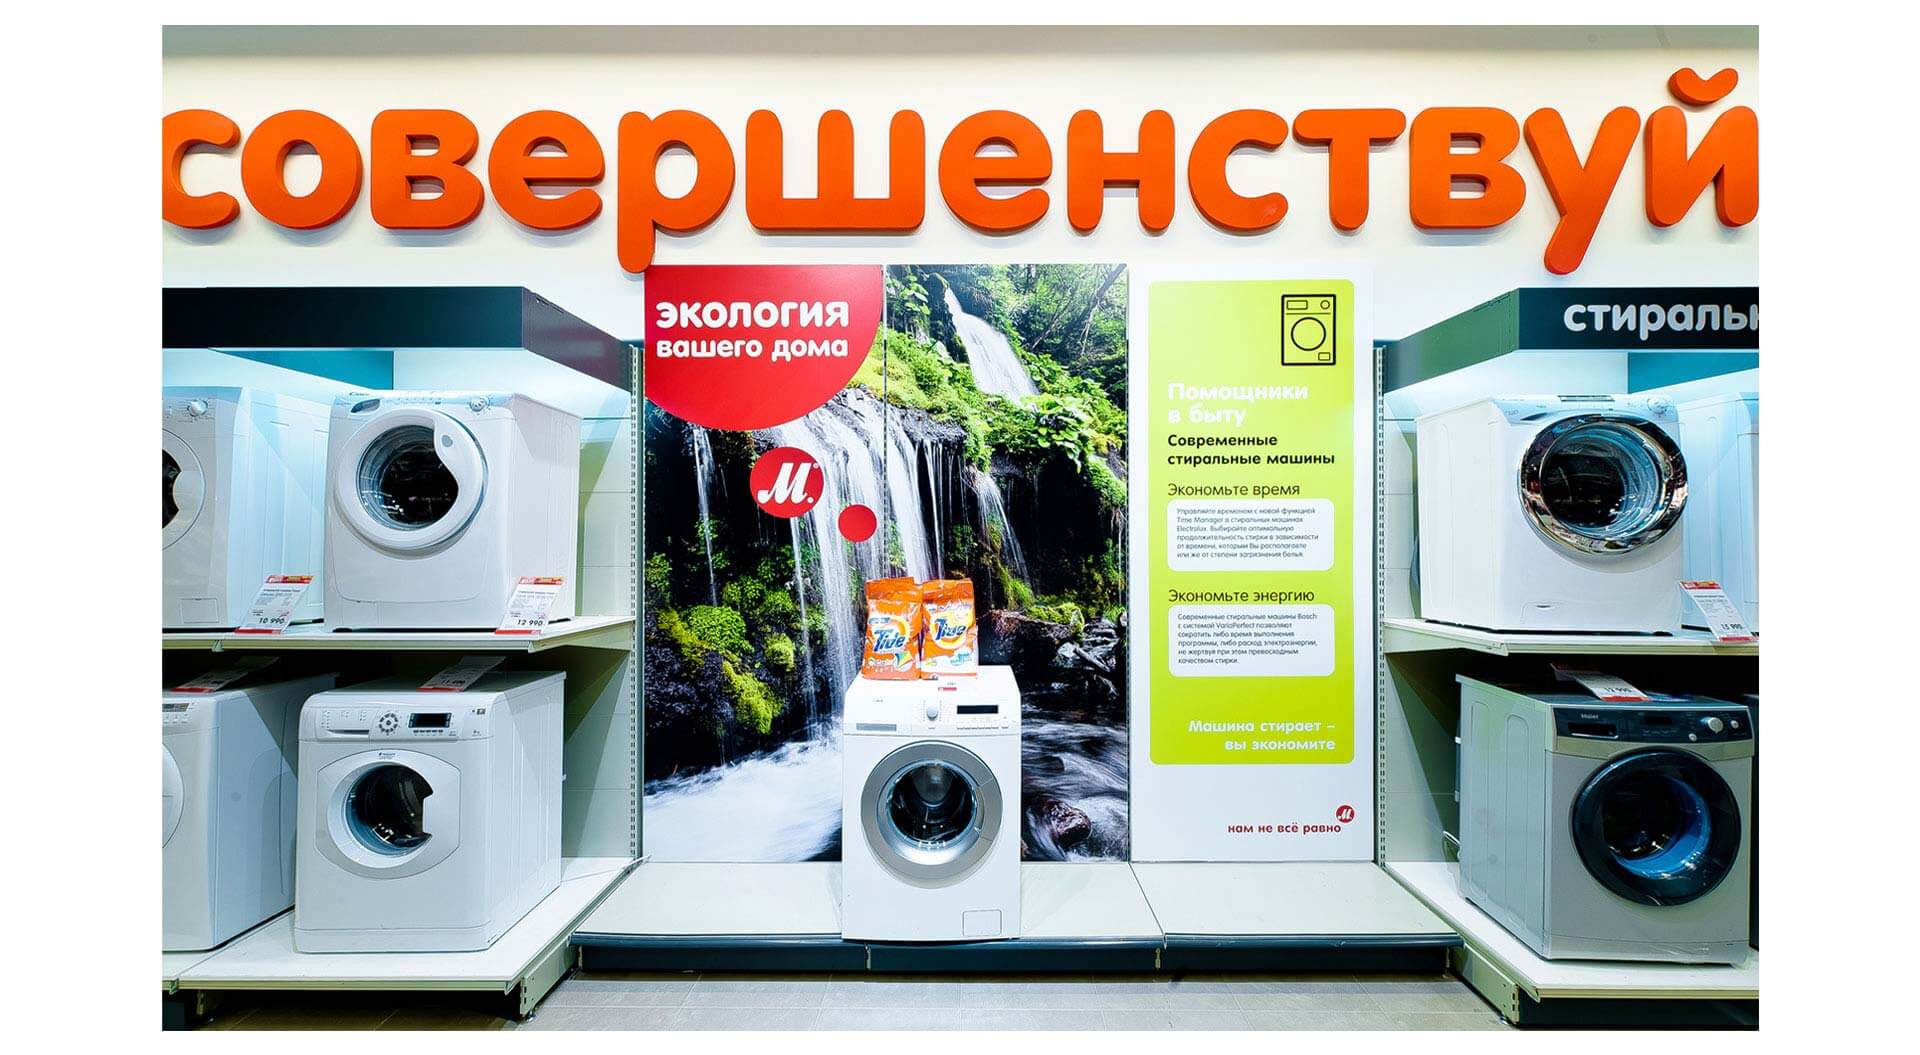 M.Video Russia retail interior store design, brand communications household technology electrical homewares and signage system